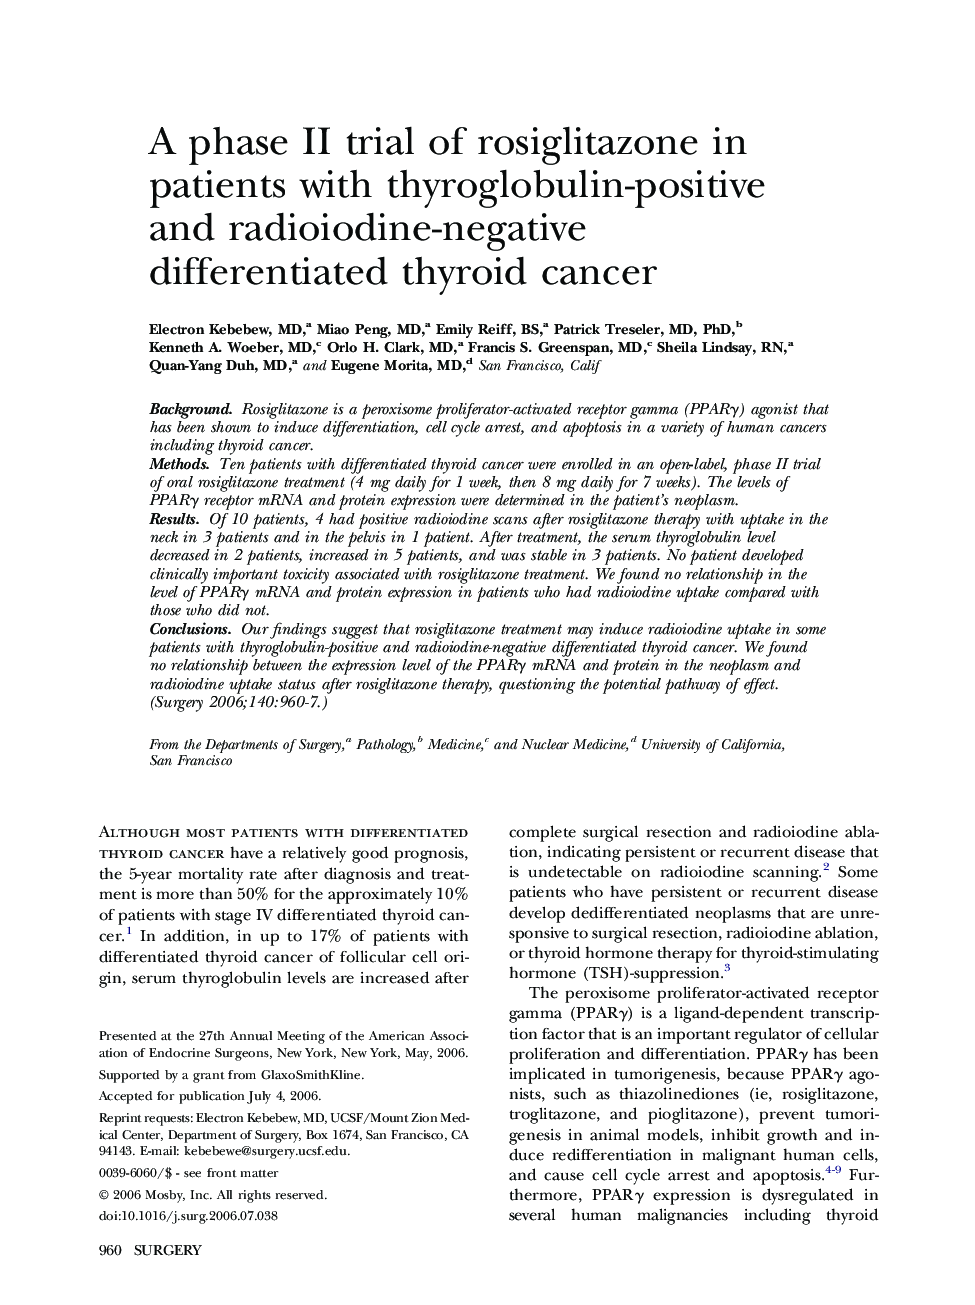 A phase II trial of rosiglitazone in patients with thyroglobulin-positive and radioiodine-negative differentiated thyroid cancer 